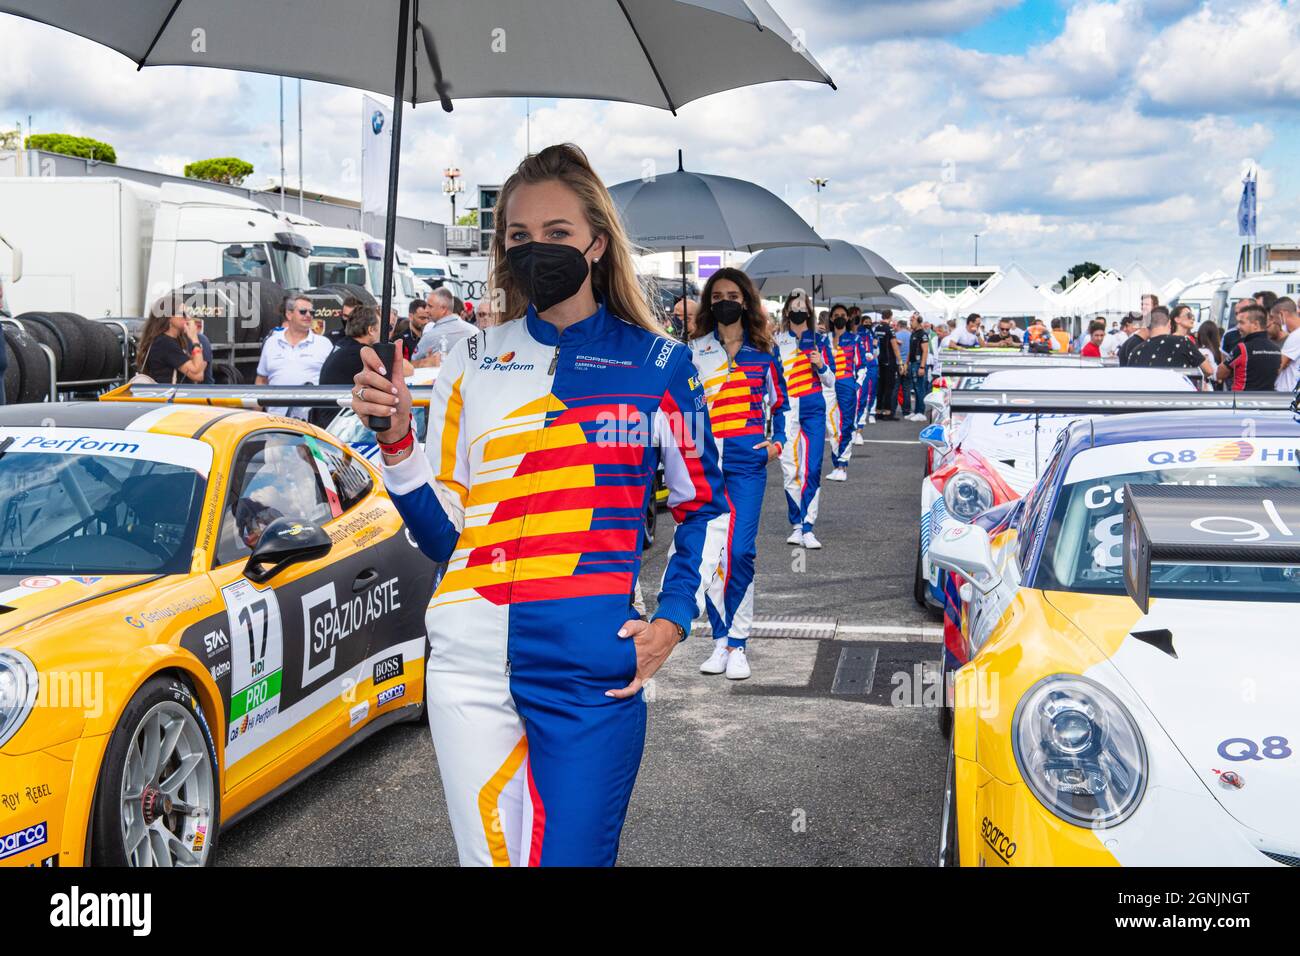 Vallelunga, italy september 19th 2021 Aci racing weekend. Girls aligned with many race cars in circuit paddock Porsche carrera show Stock Photo